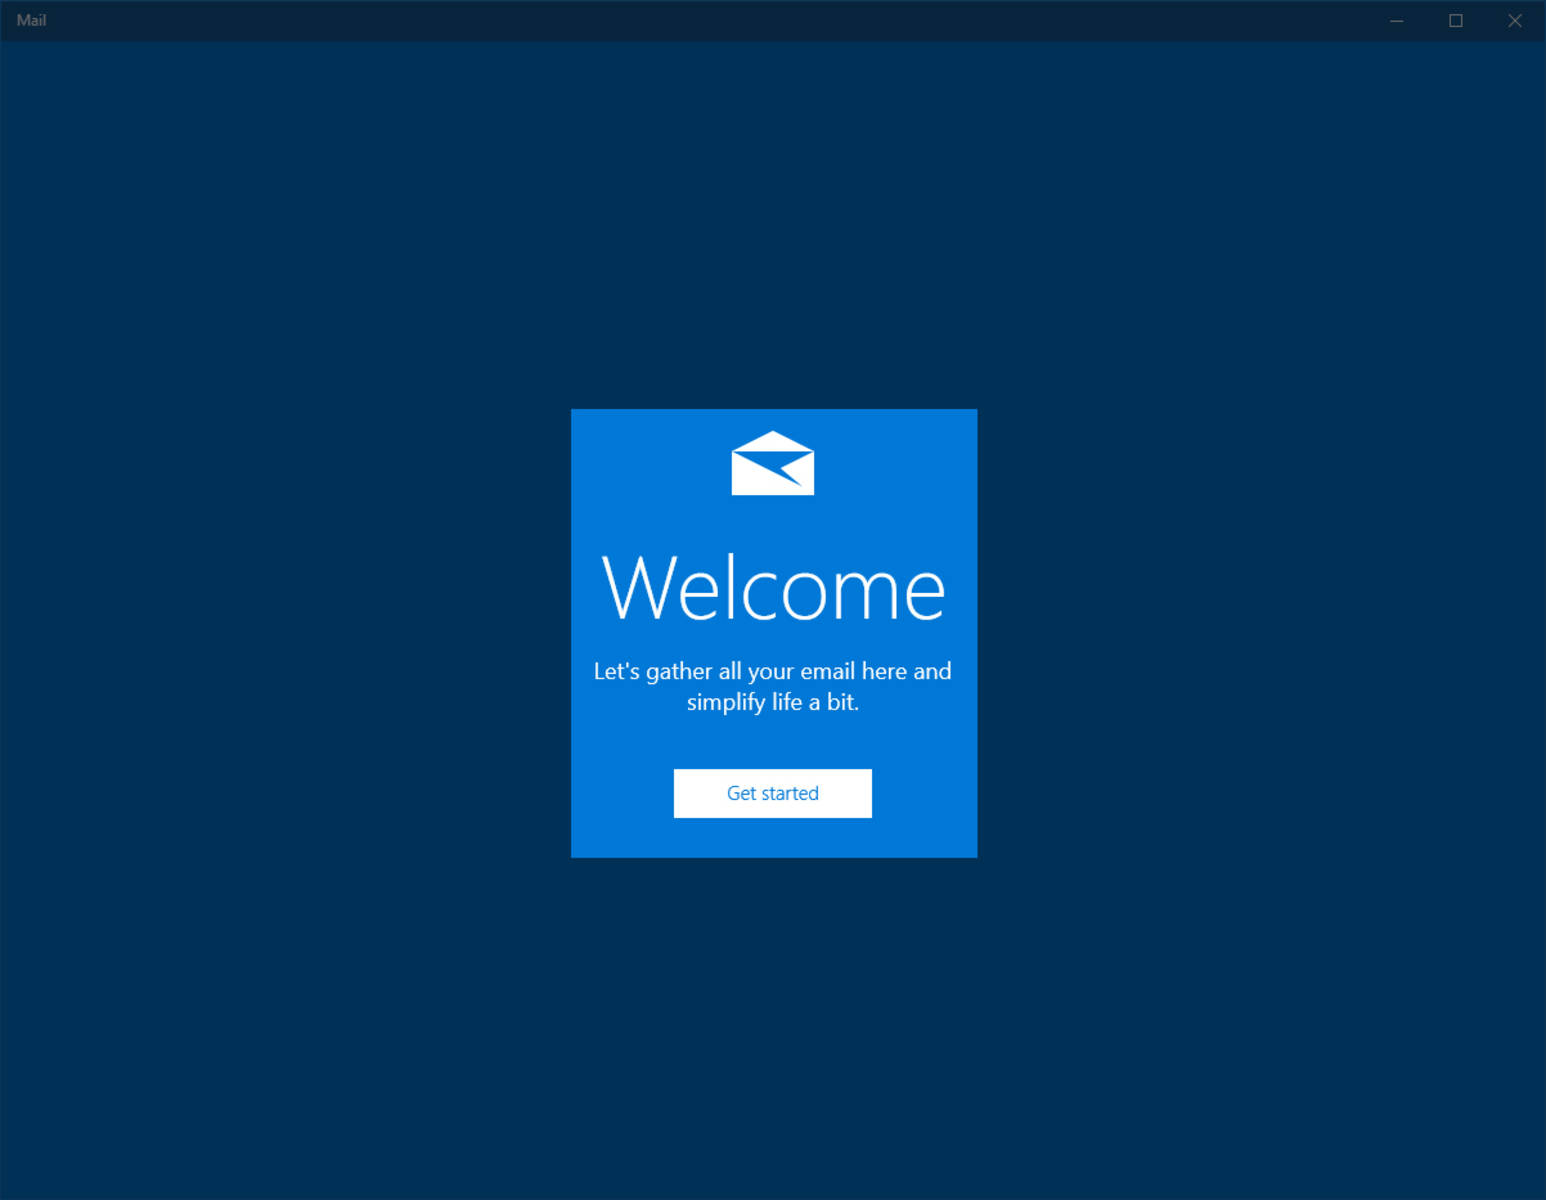 Step 2: When the welcome screen appears, click Get Started.